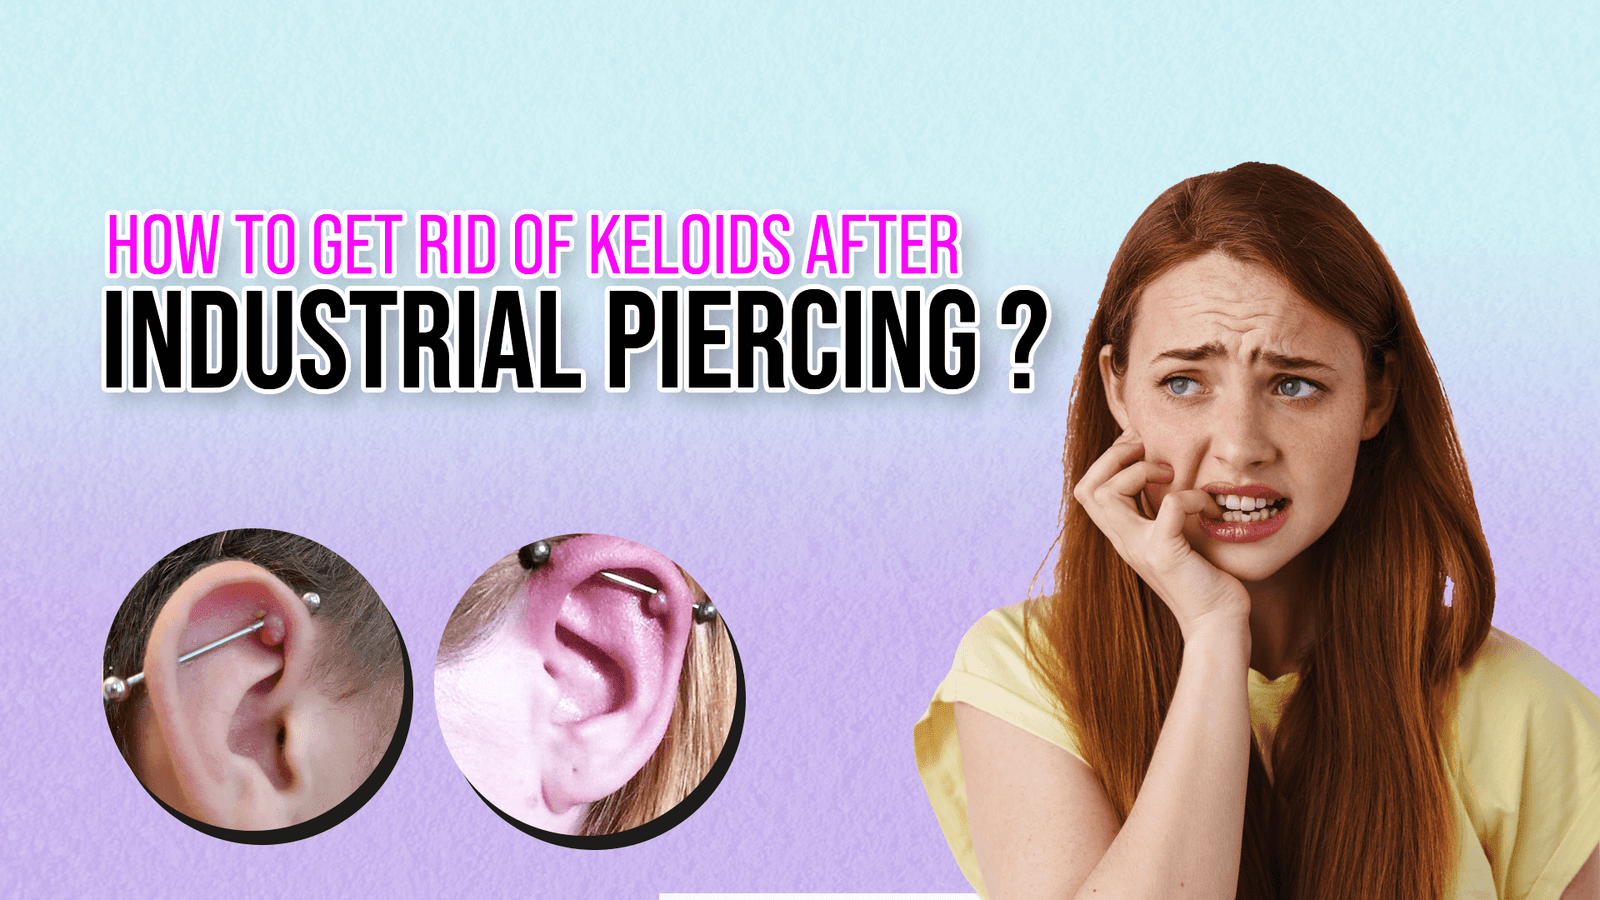 How to Get Rid of Keloids After Industrial Piercing